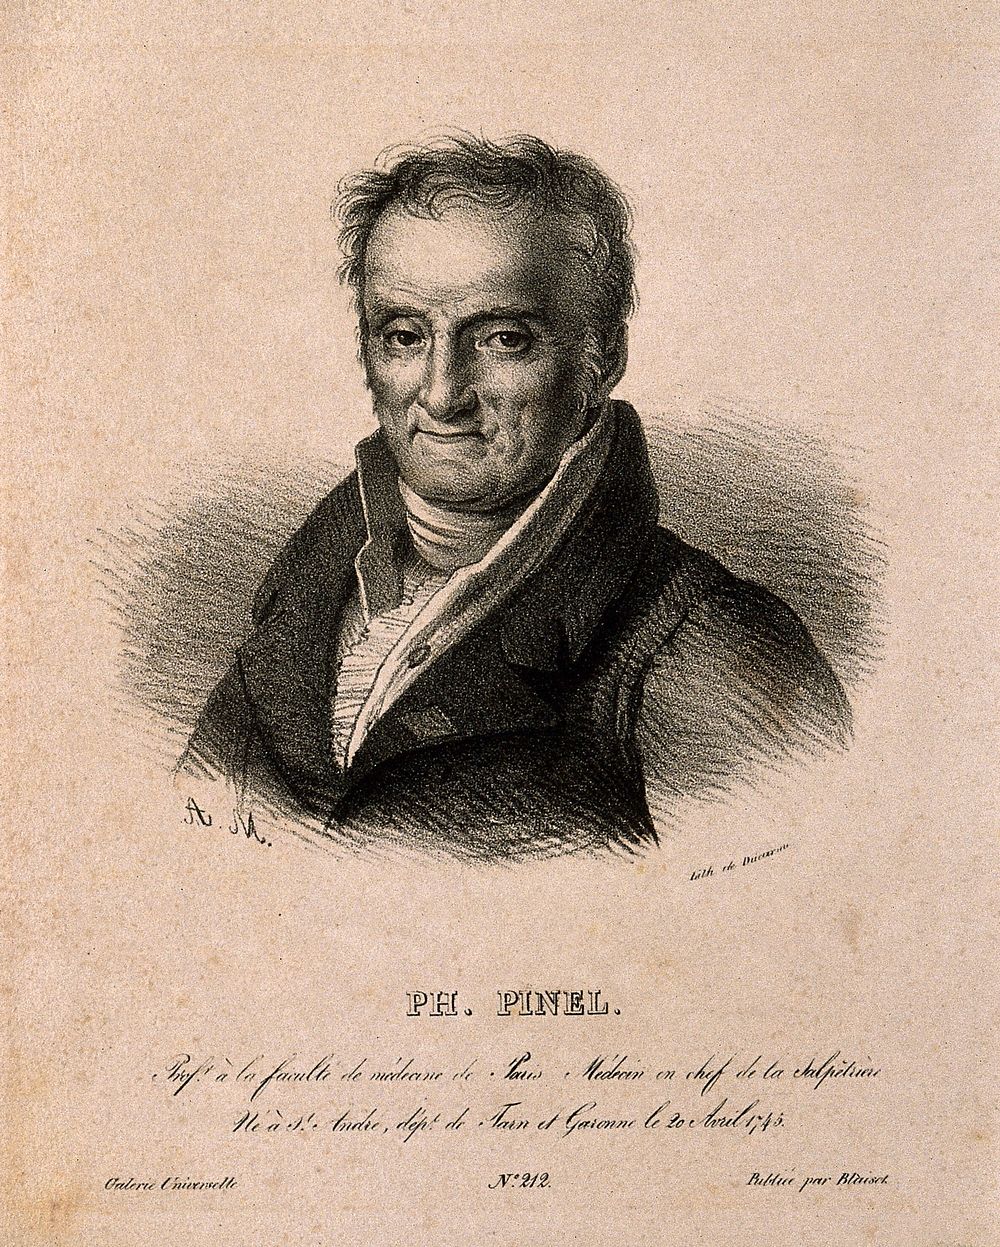 Philippe Pinel. Lithograph by A.M. (A. Maurin).